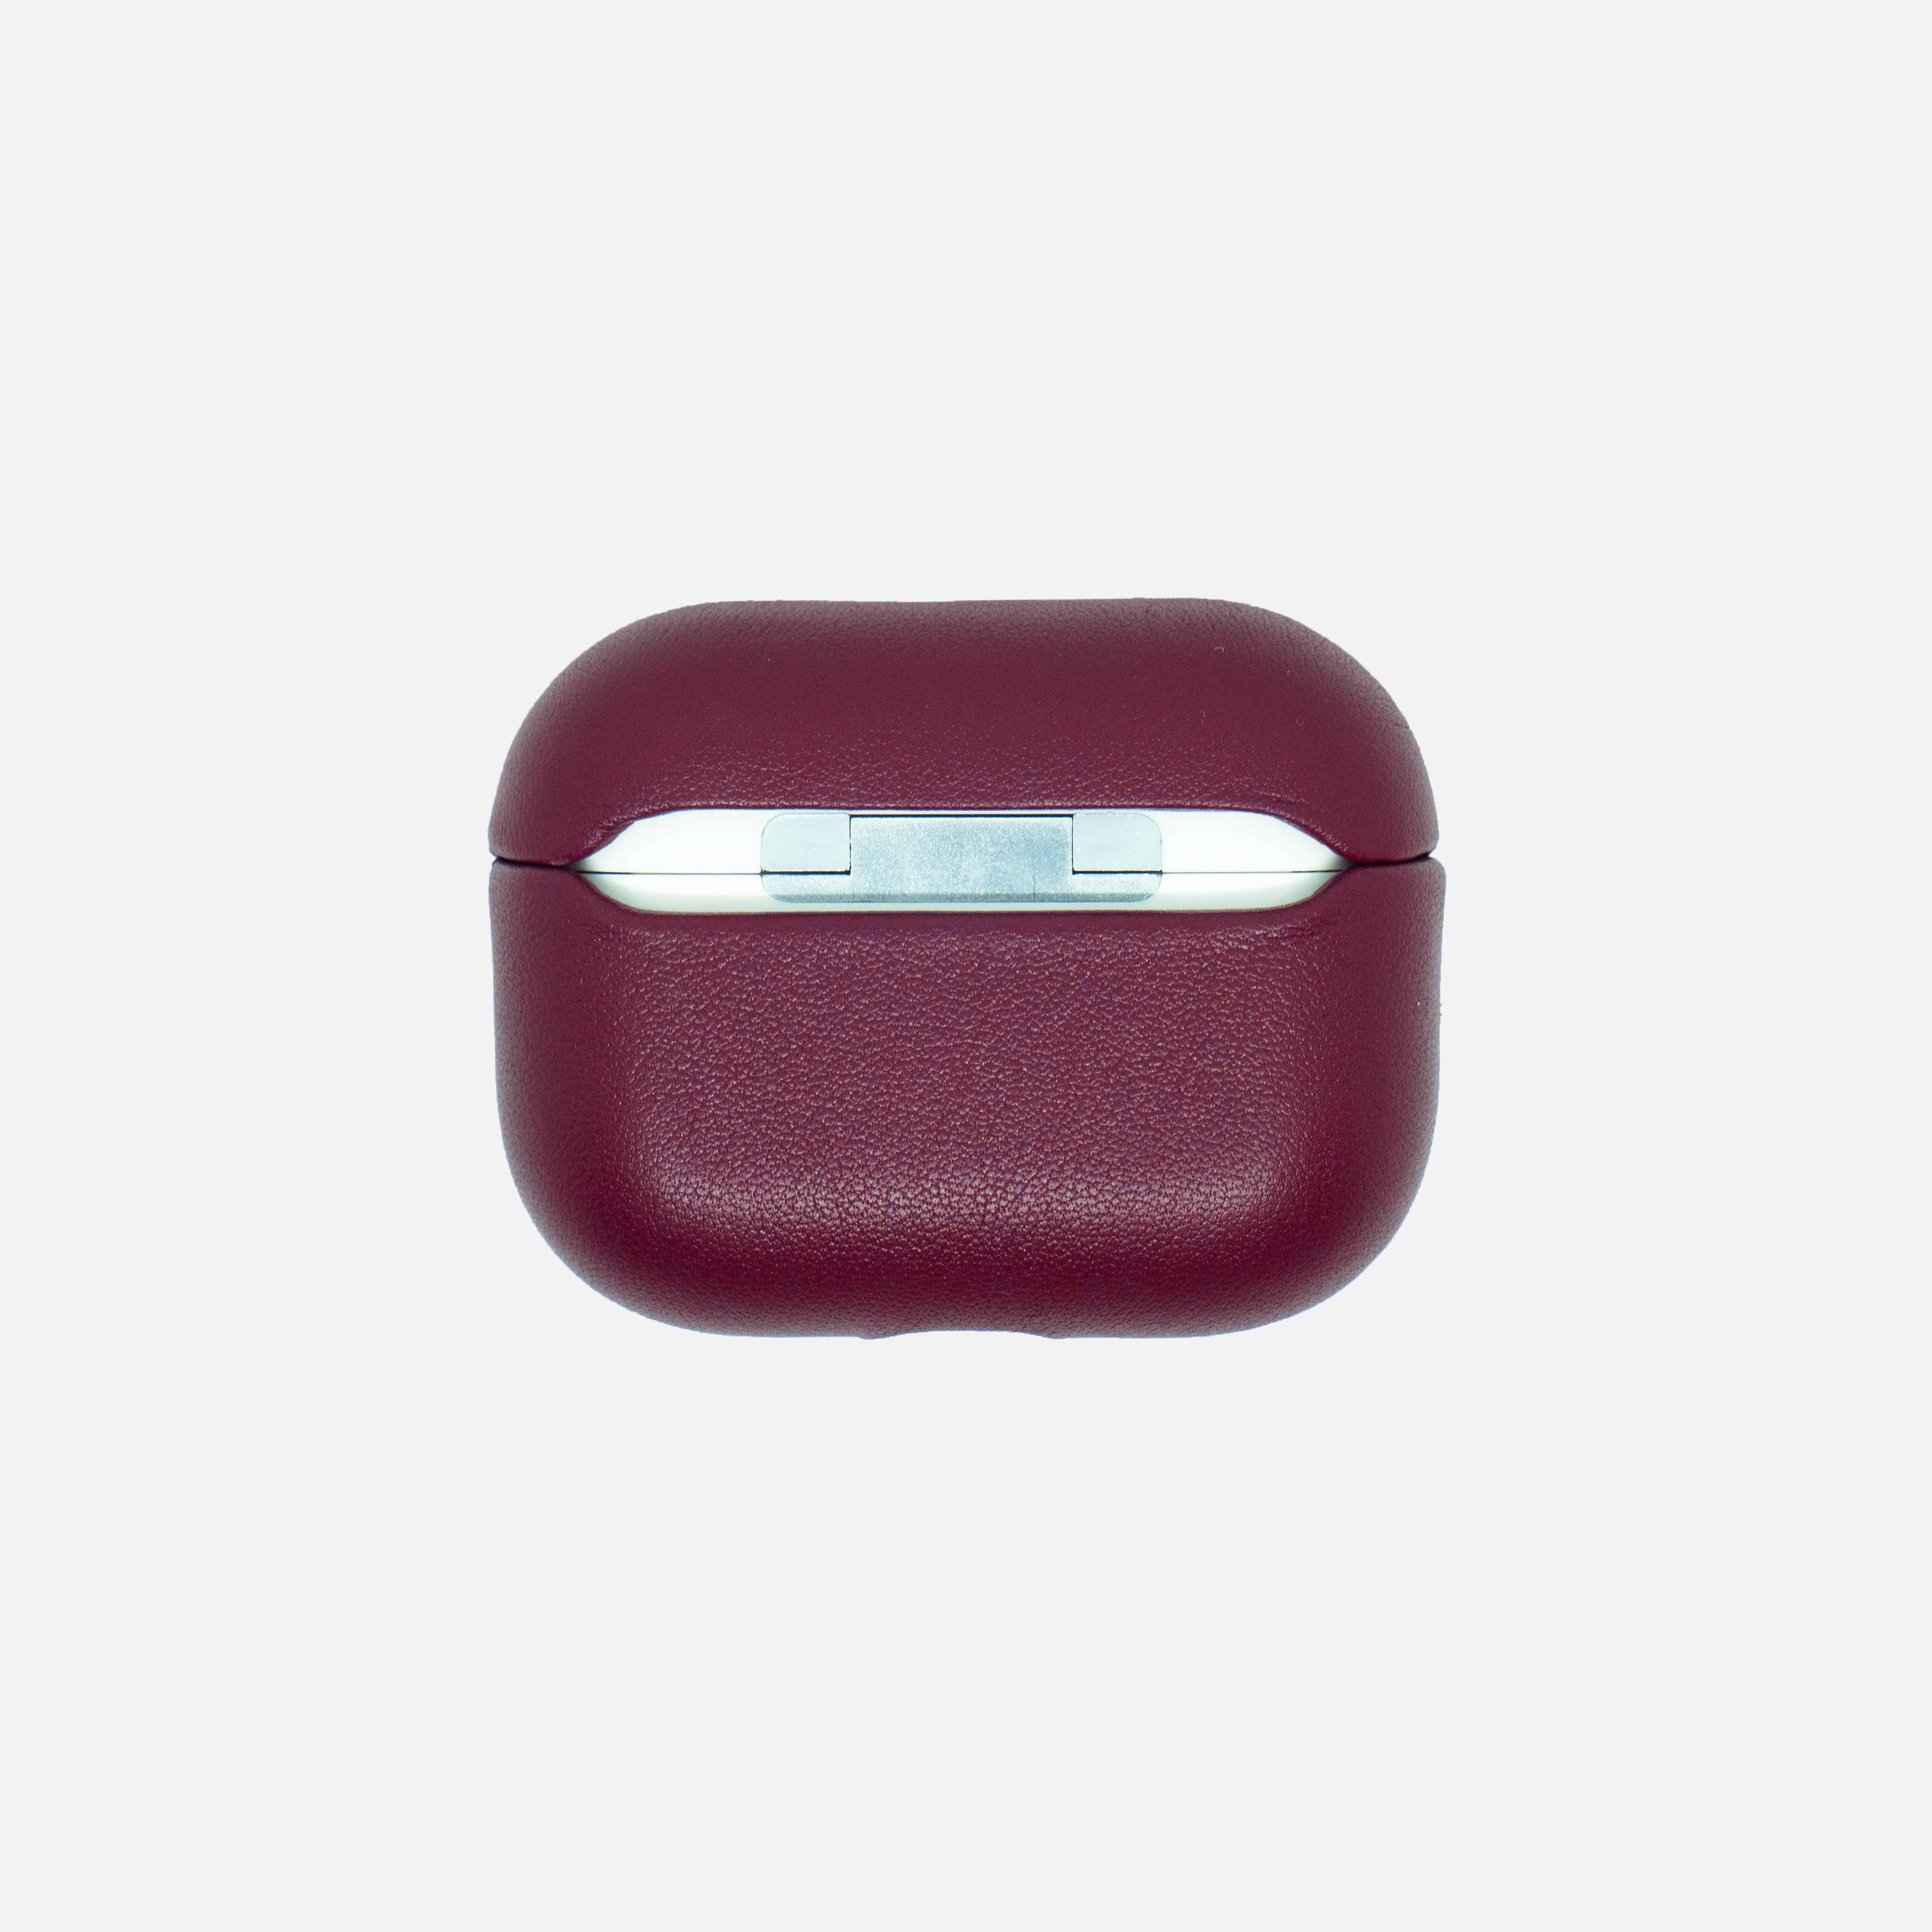 Personalised Burgundy Airpods Pro Case in Singapore with name engraving and customisation